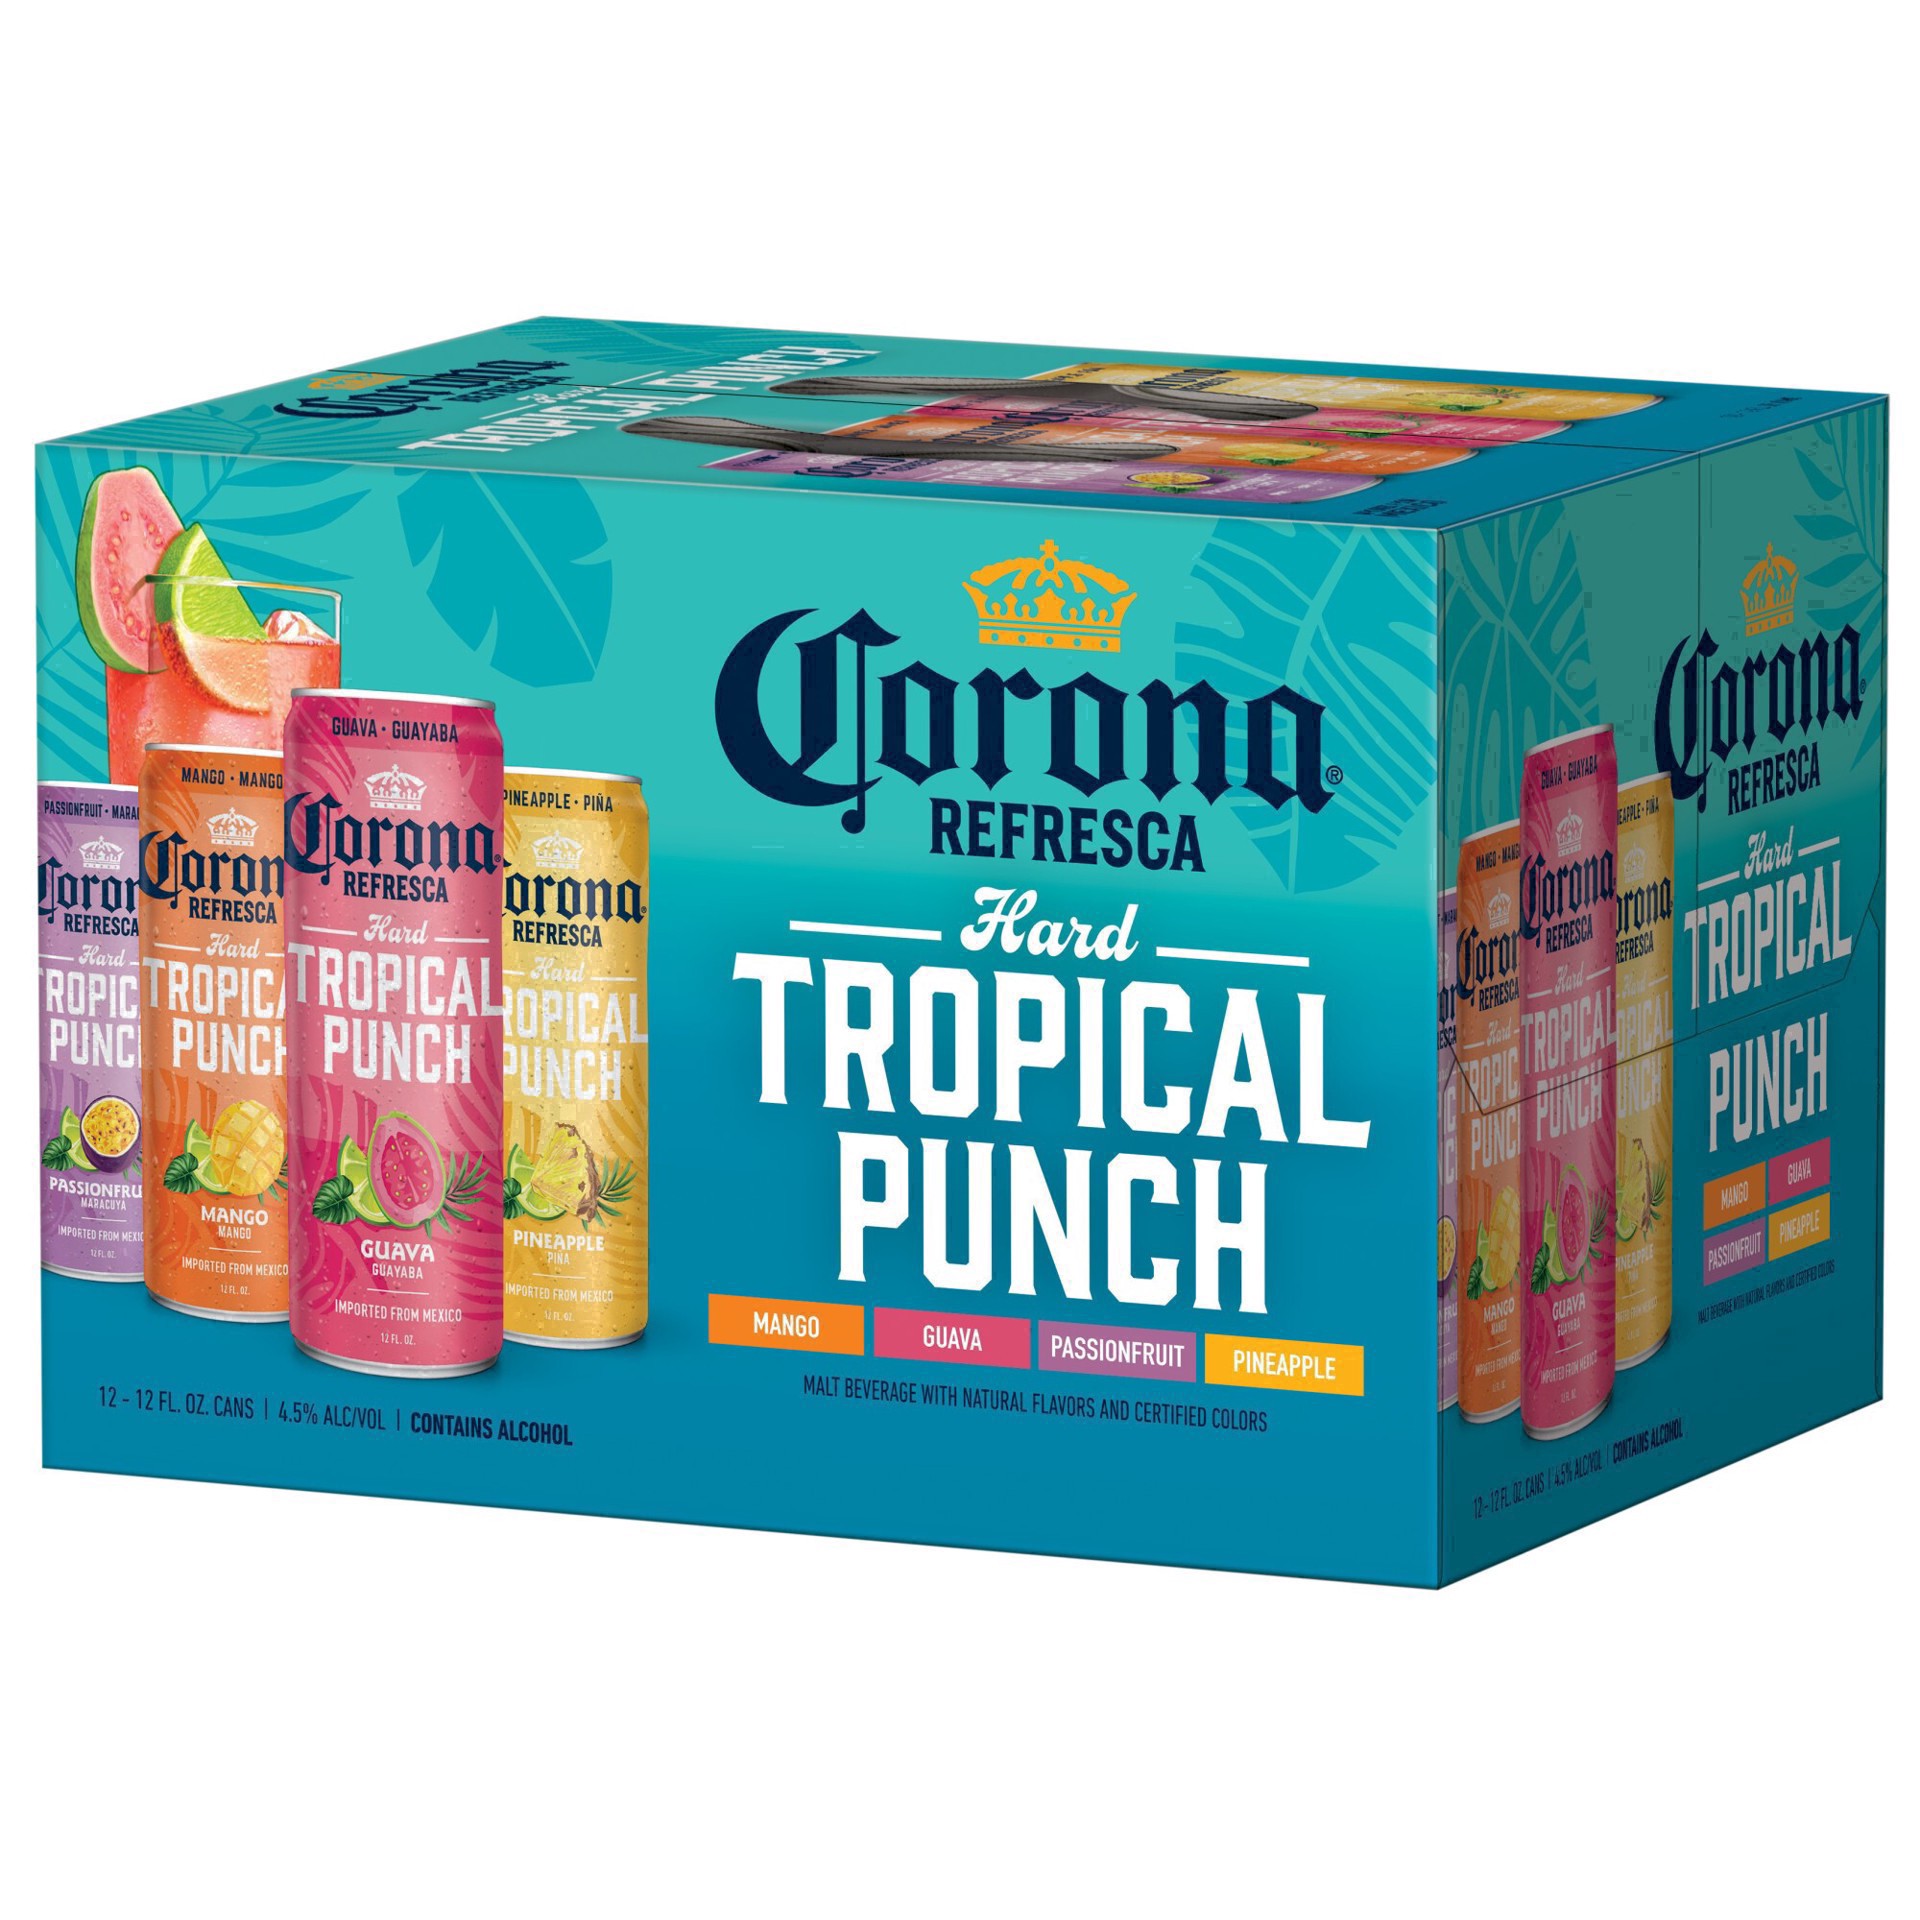 slide 113 of 113, Corona Refresca Hard Tropical Punch Variety Pack Cans, 144 fl oz